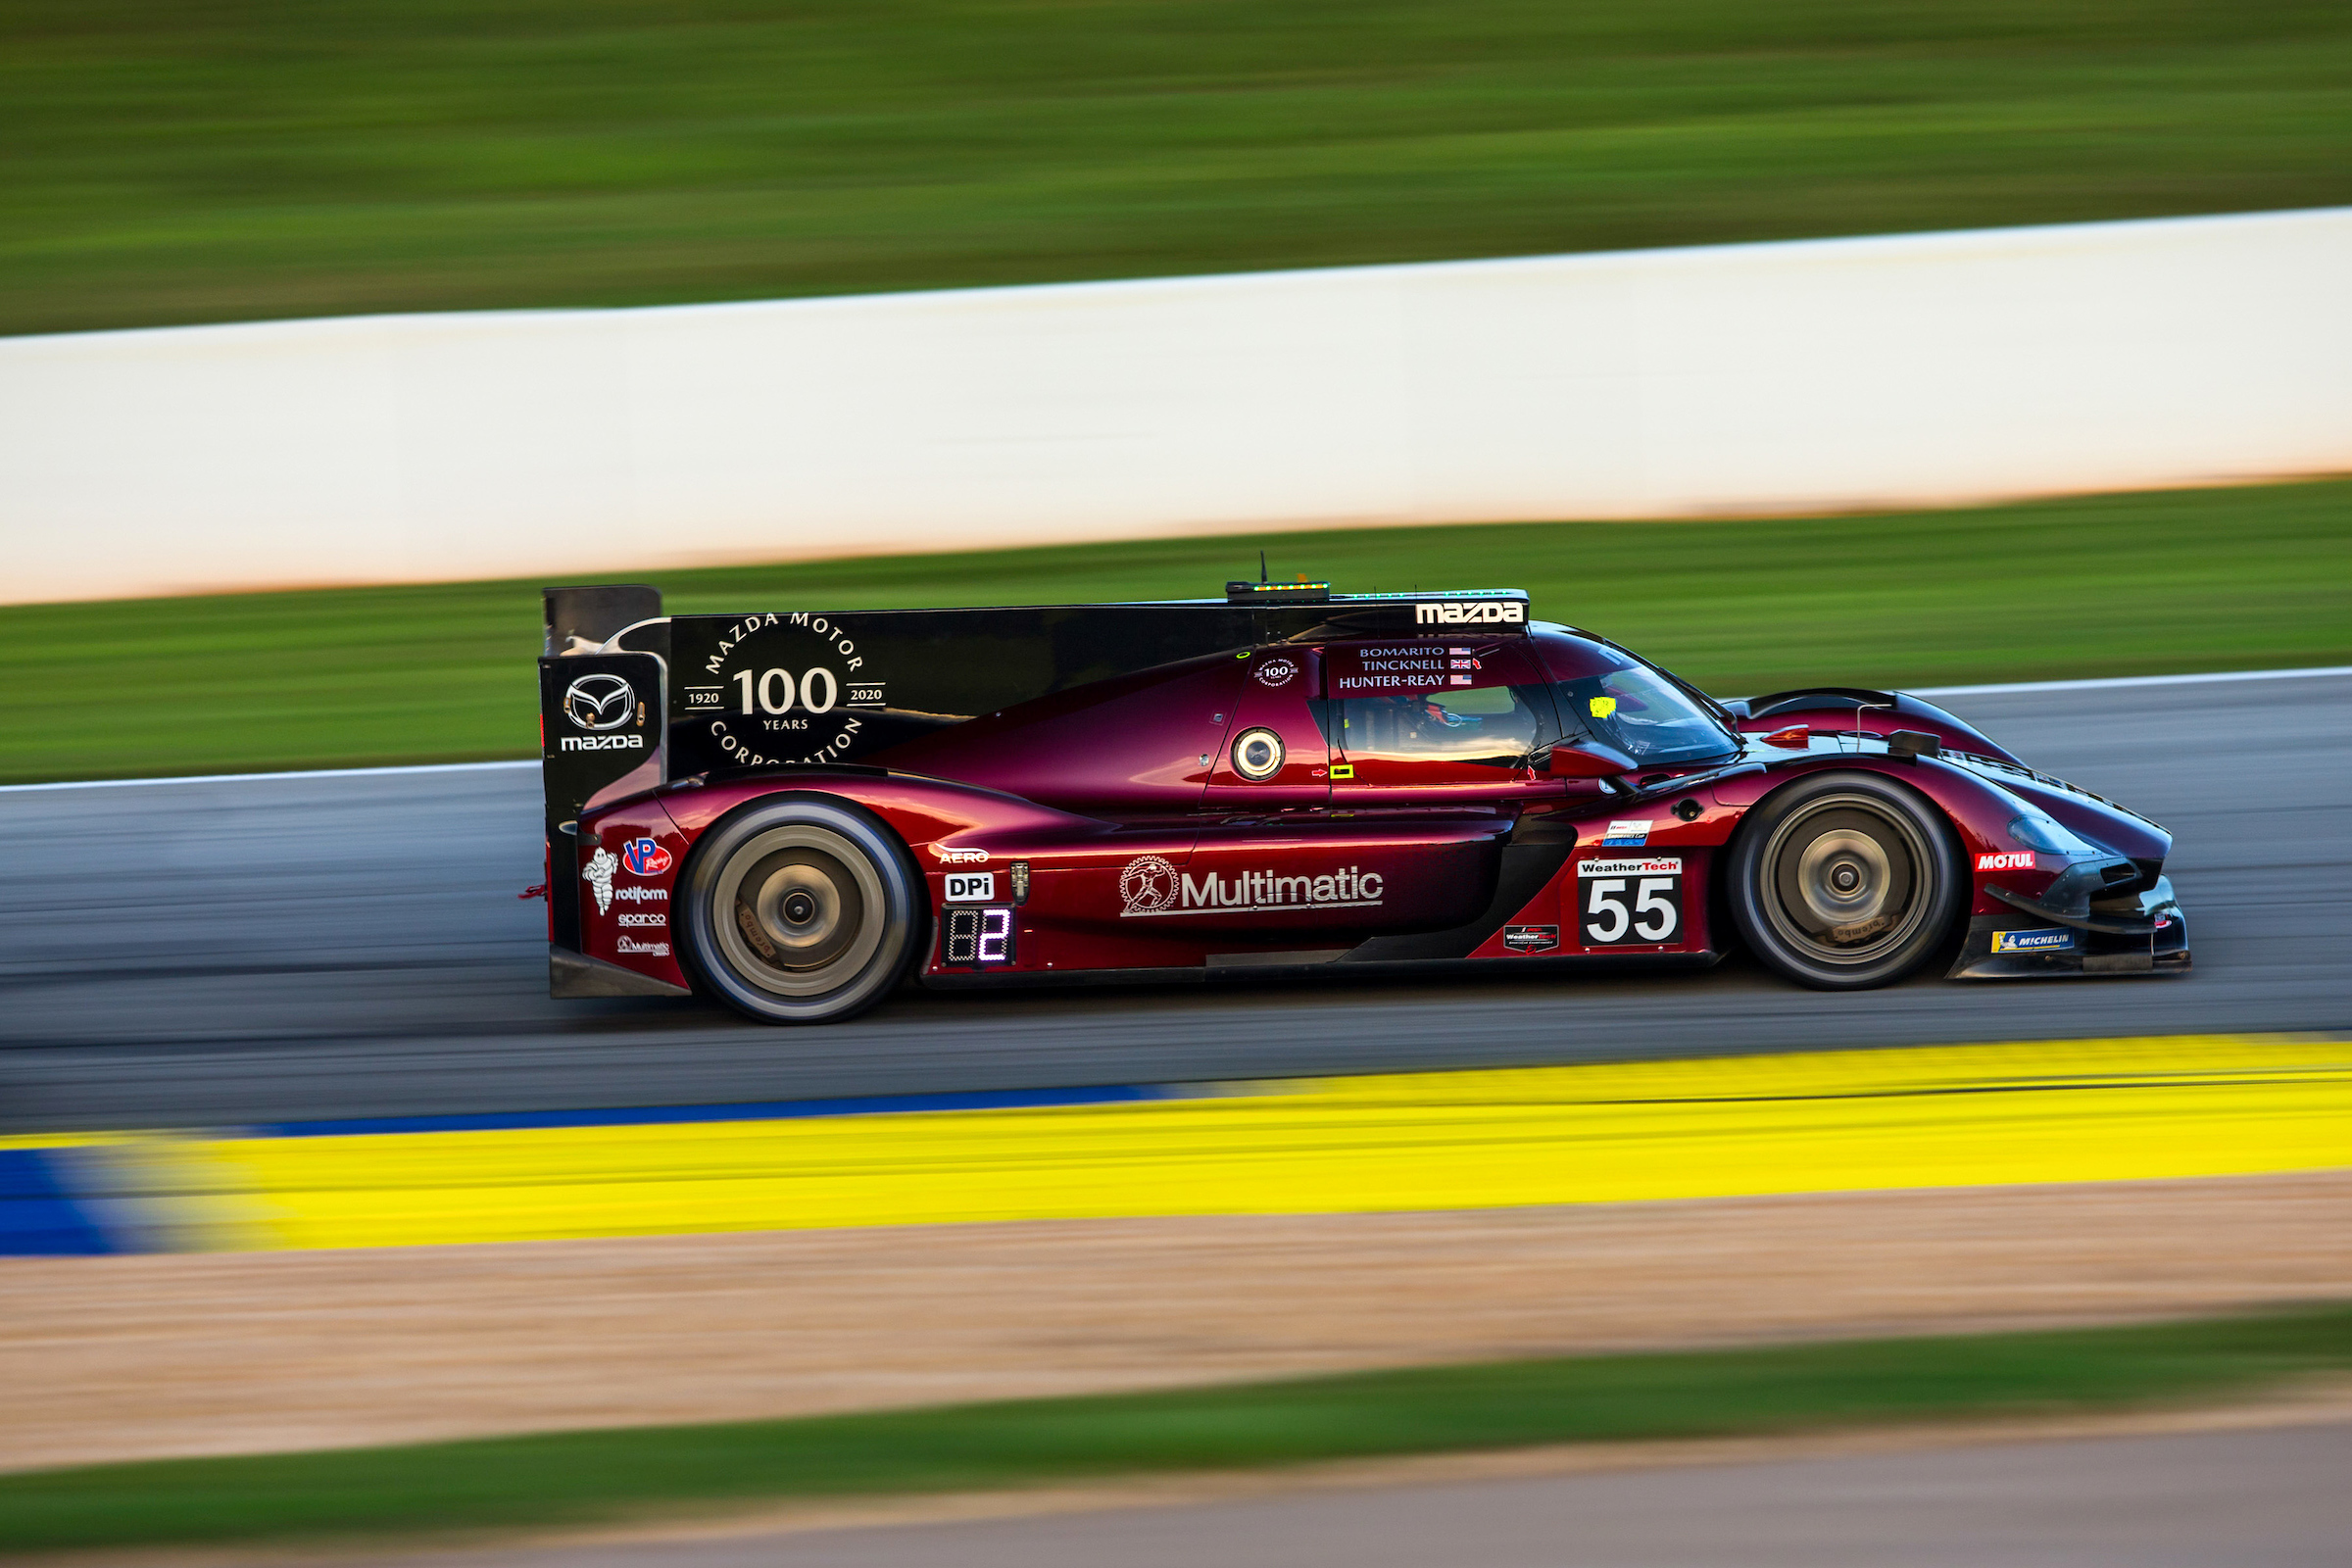 Mazda back in IMSA action this weekend at the 2020 Petit Le Mans